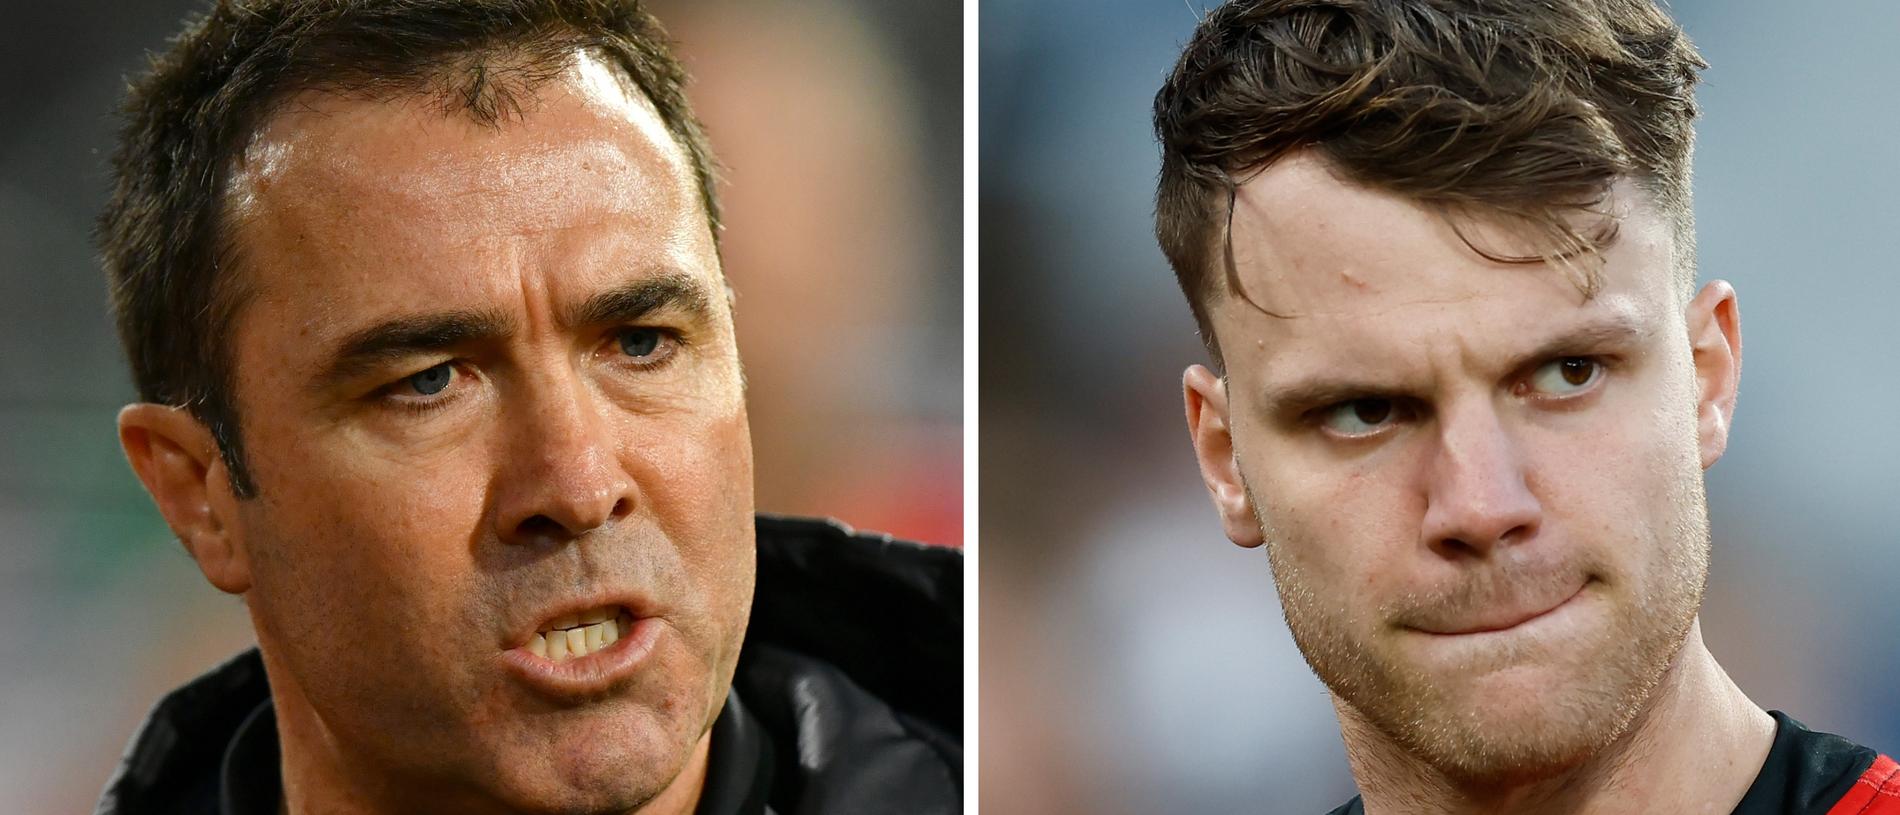 Essendon coach Brad Scott has revealed that the AFL contacted him on Monday to admit to several mistakes made in the controversial clash against Geelong in round 16.